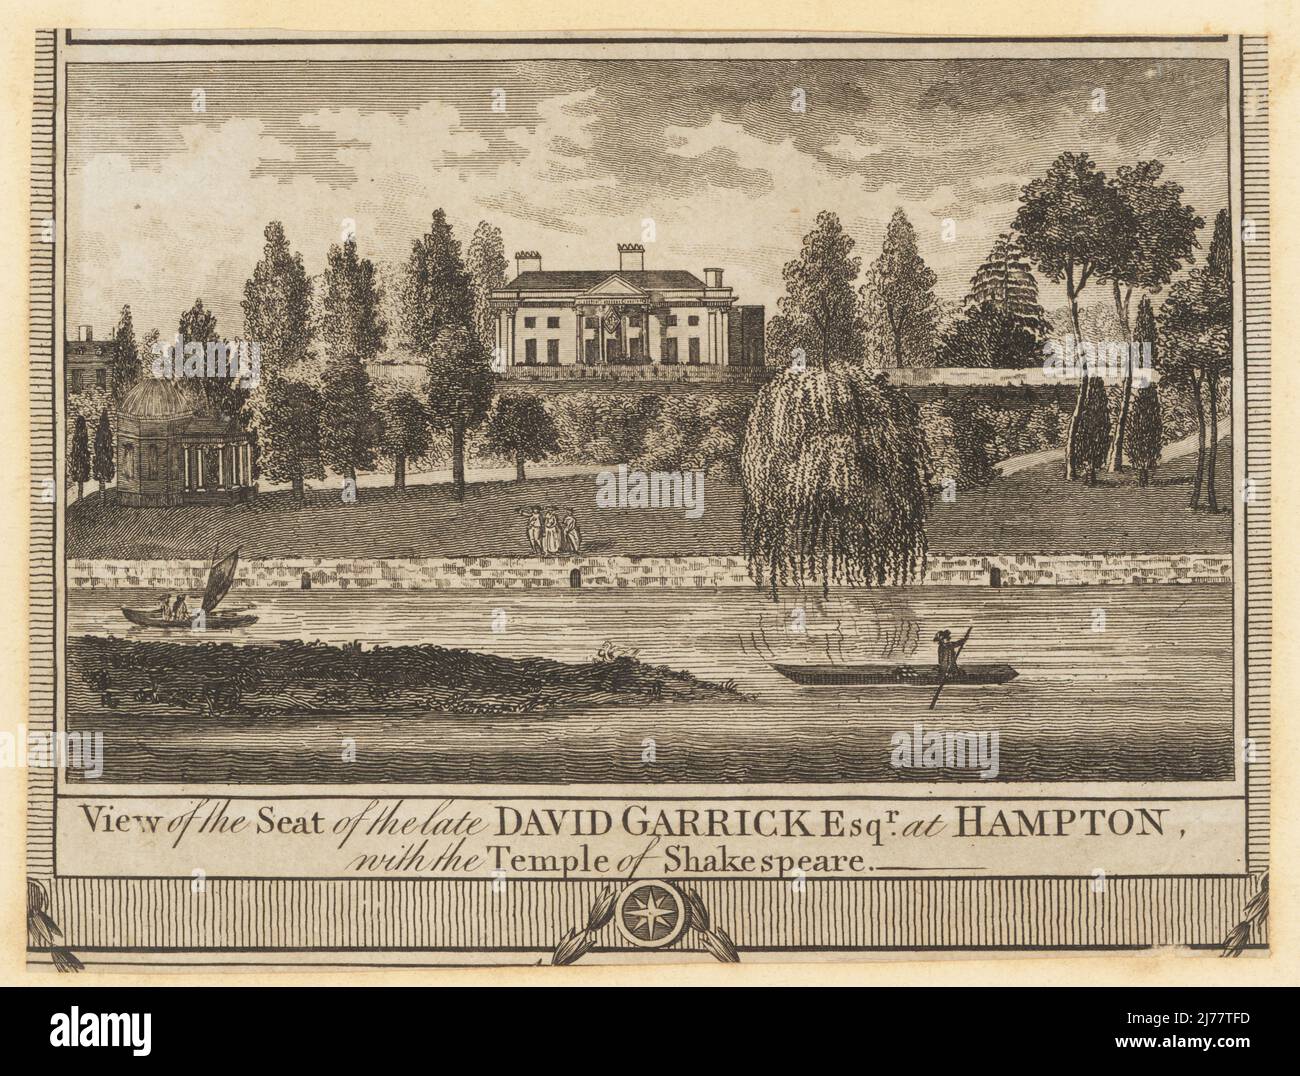 View of David Garrick's Villa, Hampton Court Road, 18th century. Seat of the late David Garrick Esq at Hampton. Portico by neoclassical architect Robert Adam added in the 1750s, and Temple of Shakespeare, an octagonal dome with Ionic portico, built in the garden around 1755. Copperplate engraving from William Thornton’s New, Complete and Universal History of the City of London, Alexander Hogg, King's Arms, No. 16 Paternoster Row, London, 1784. Stock Photo